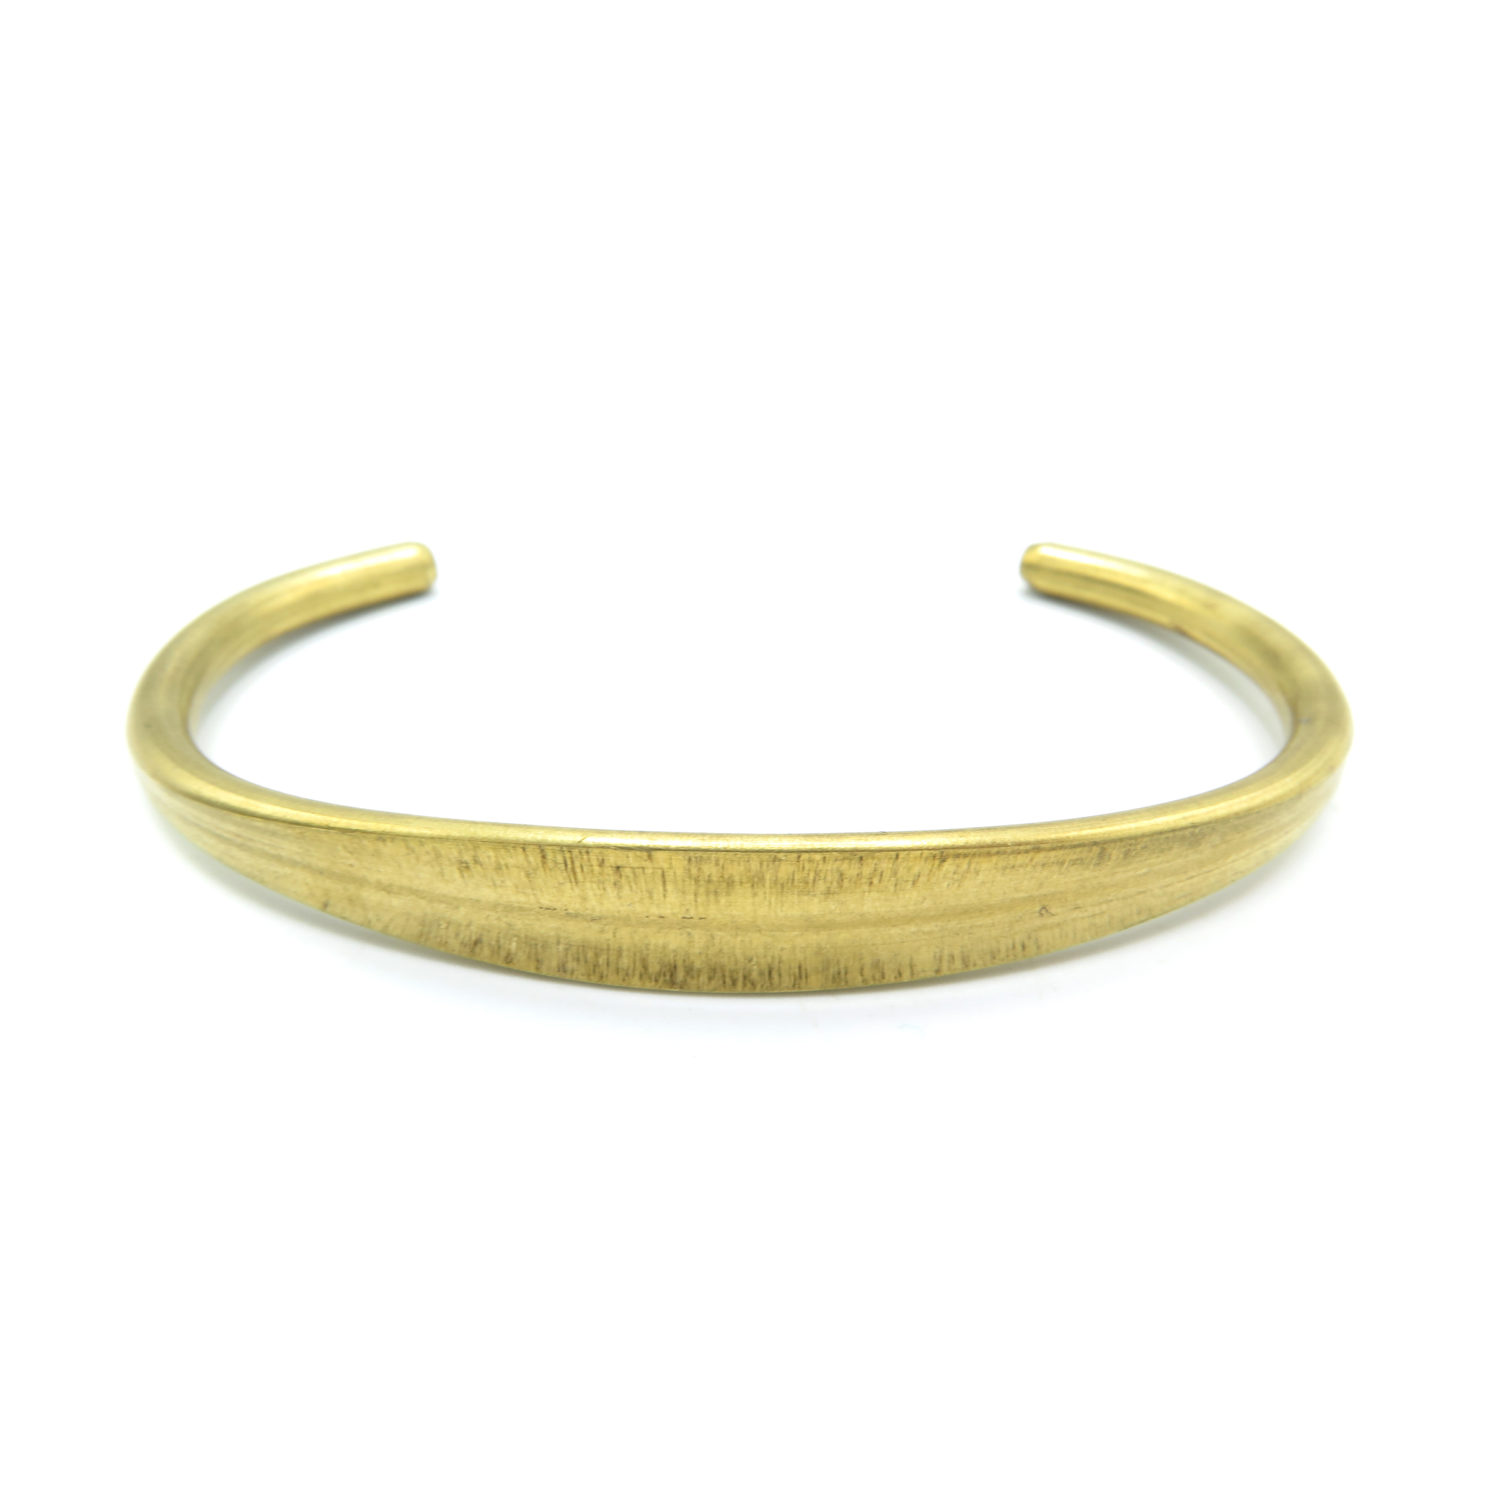 Rounded Adjustable Brass Engraving Cuff Bracelets | Brooklyn Charm